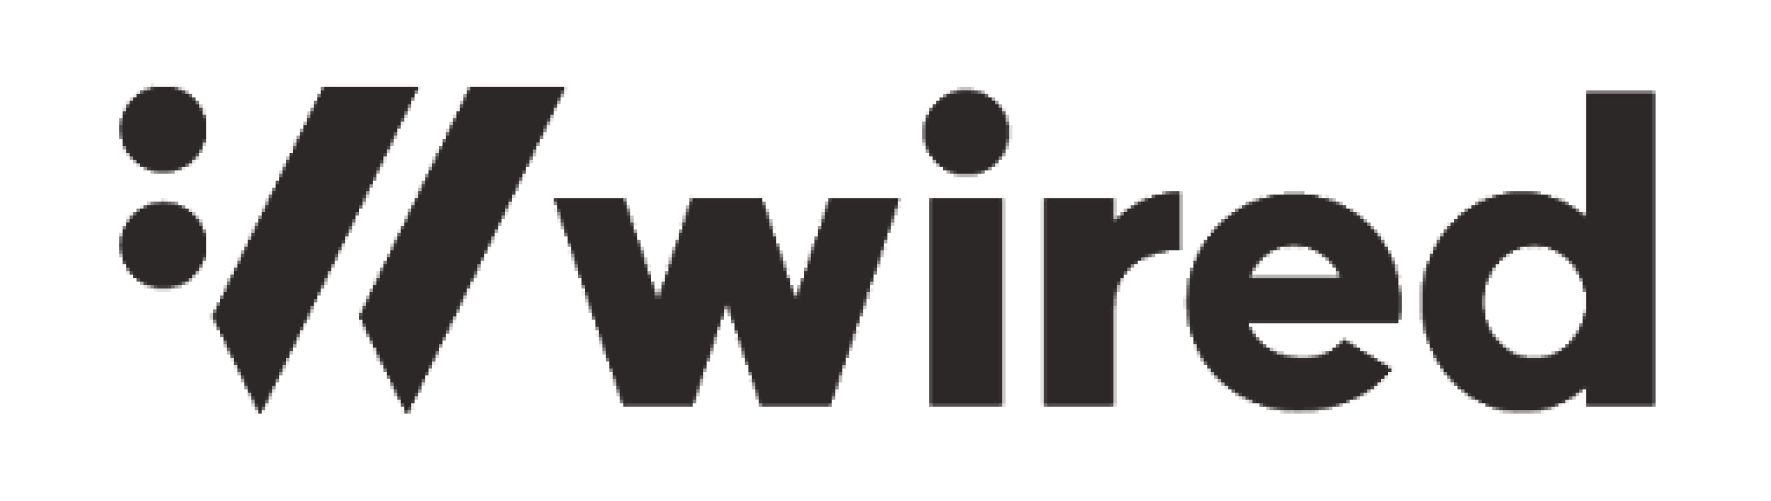 wired-logo